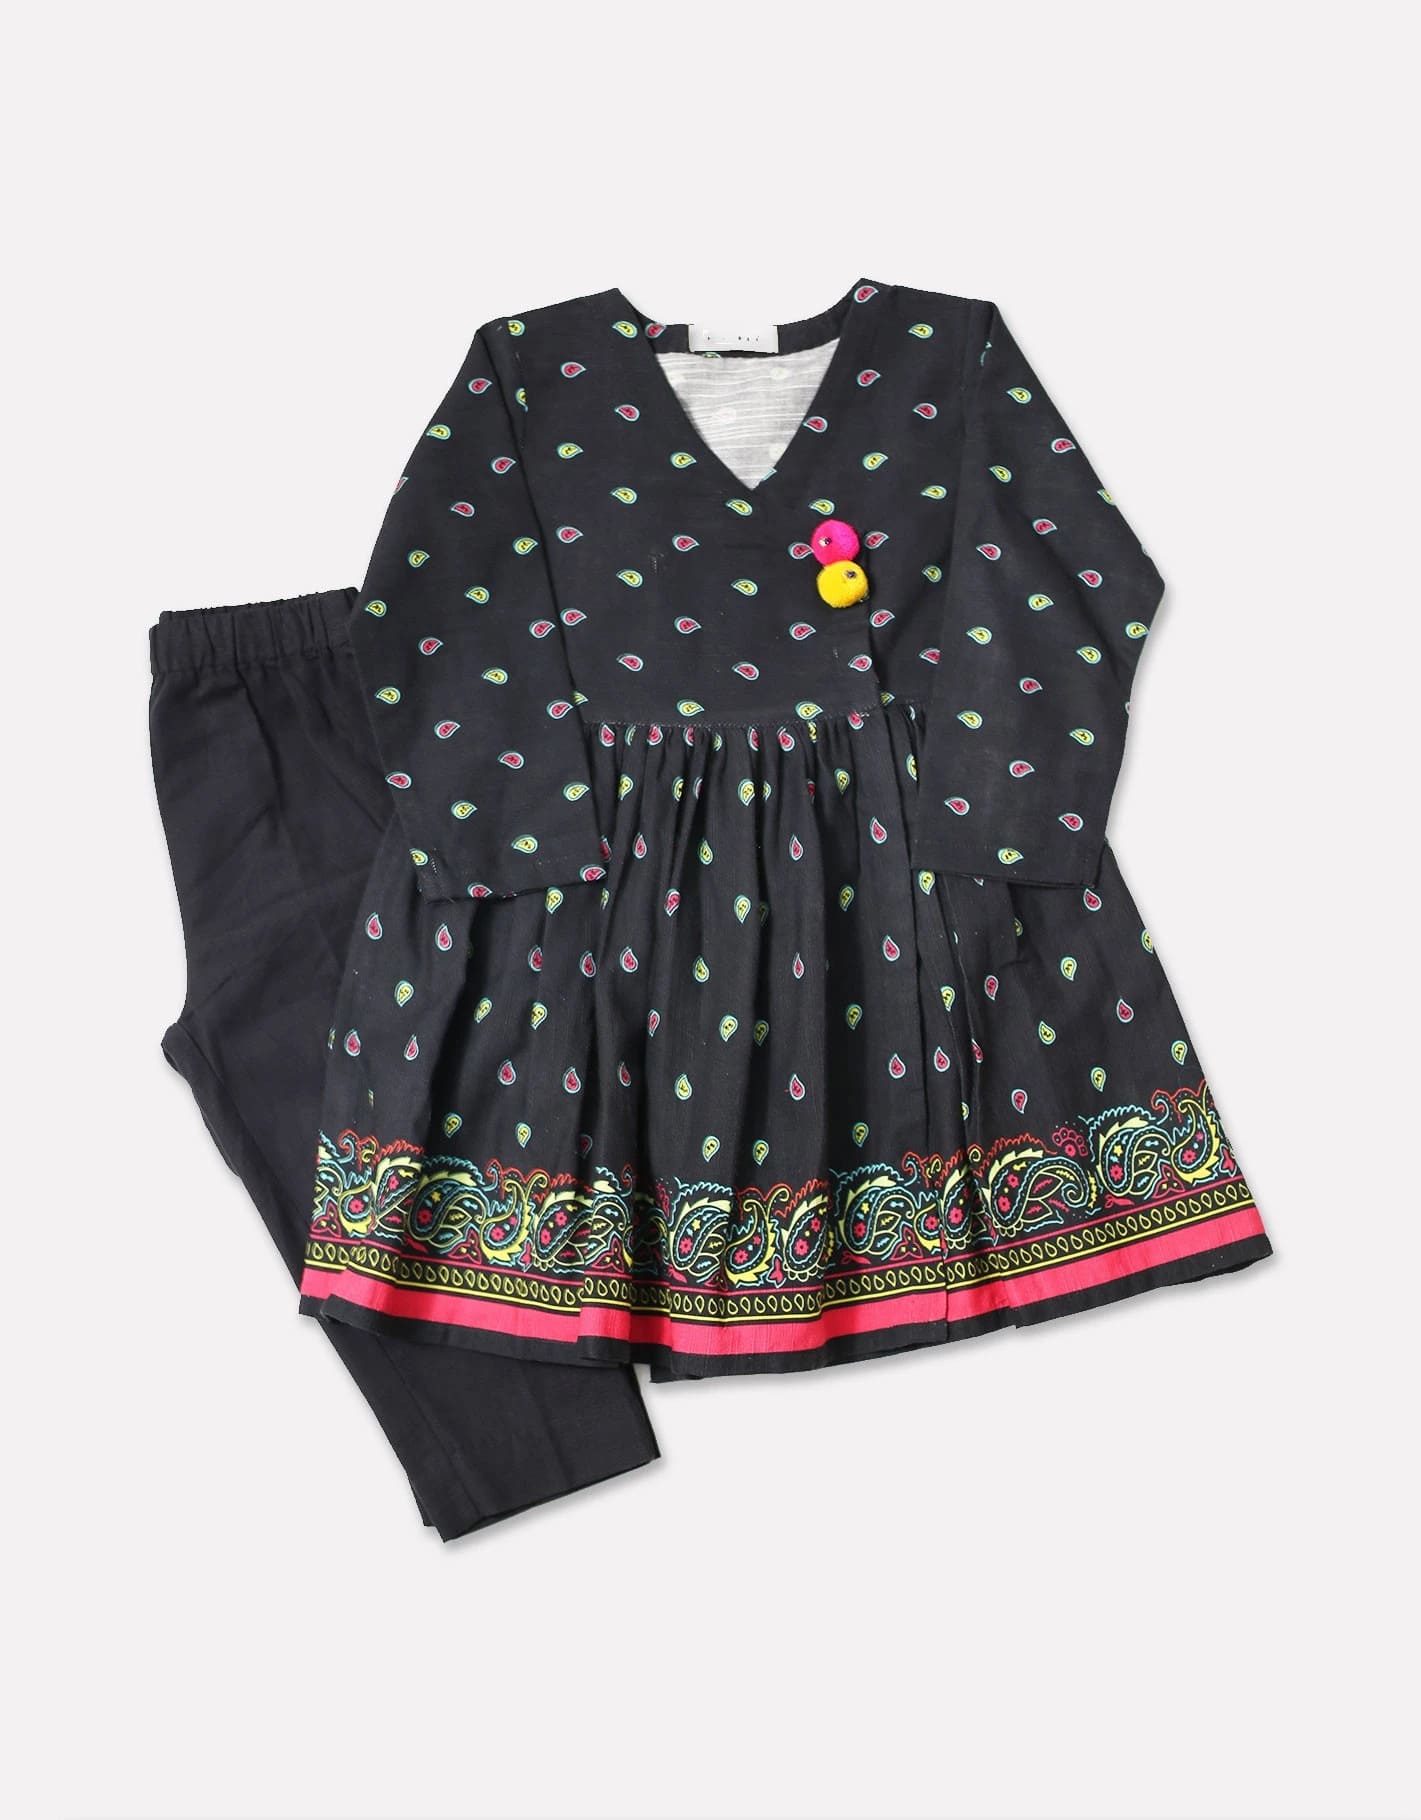 2021 Summer Cotton Princess Dress For Girls Elegant Dot Sling Design,  Perfect For Birthday Parties Available In Sizes 4 10 Years Q0716 From  Sihuai04, $9.65 | DHgate.Com